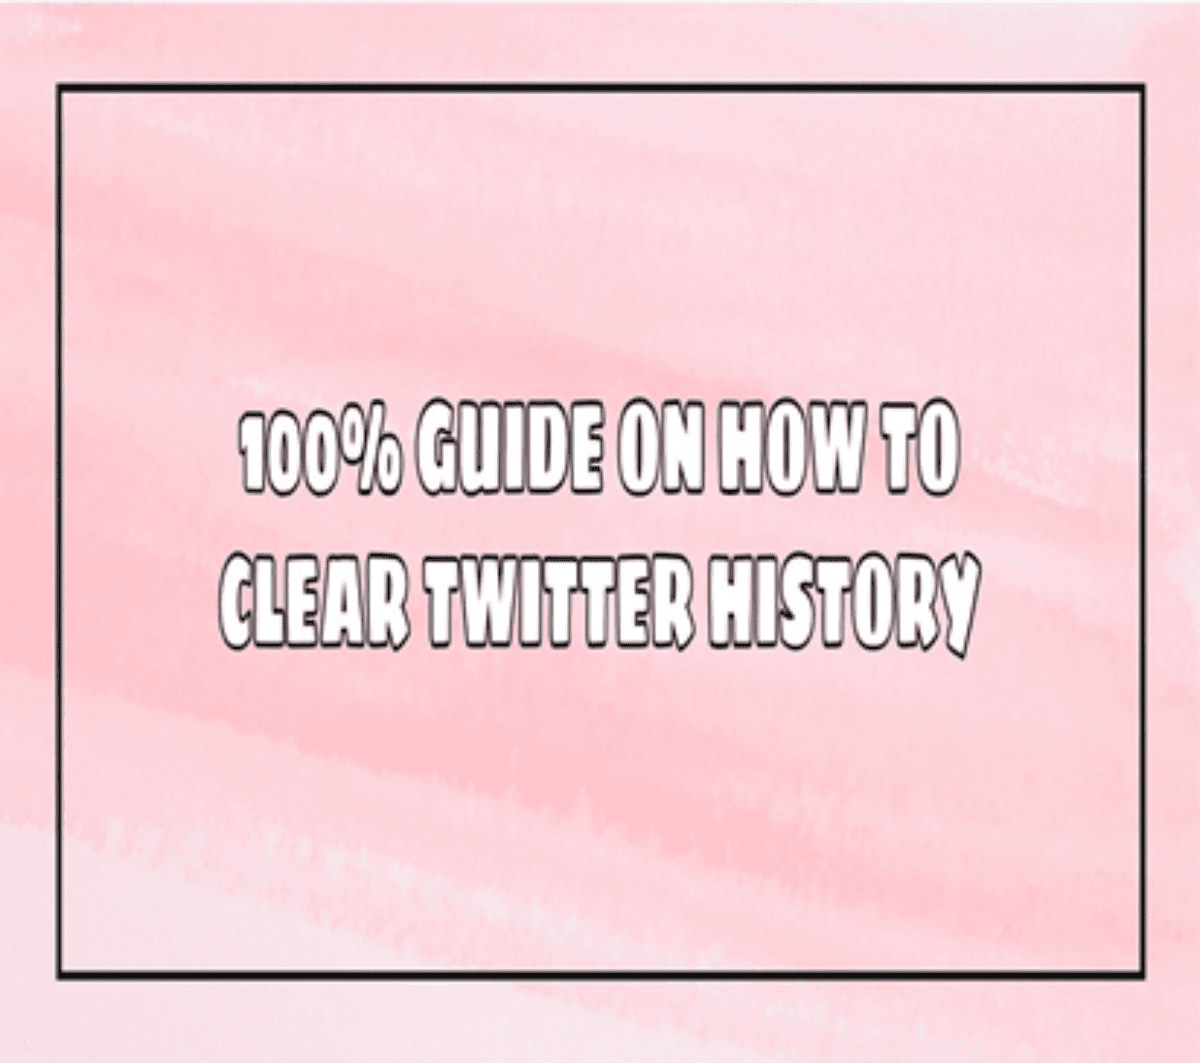 13% Effective Guide on How To Clear Twitter History